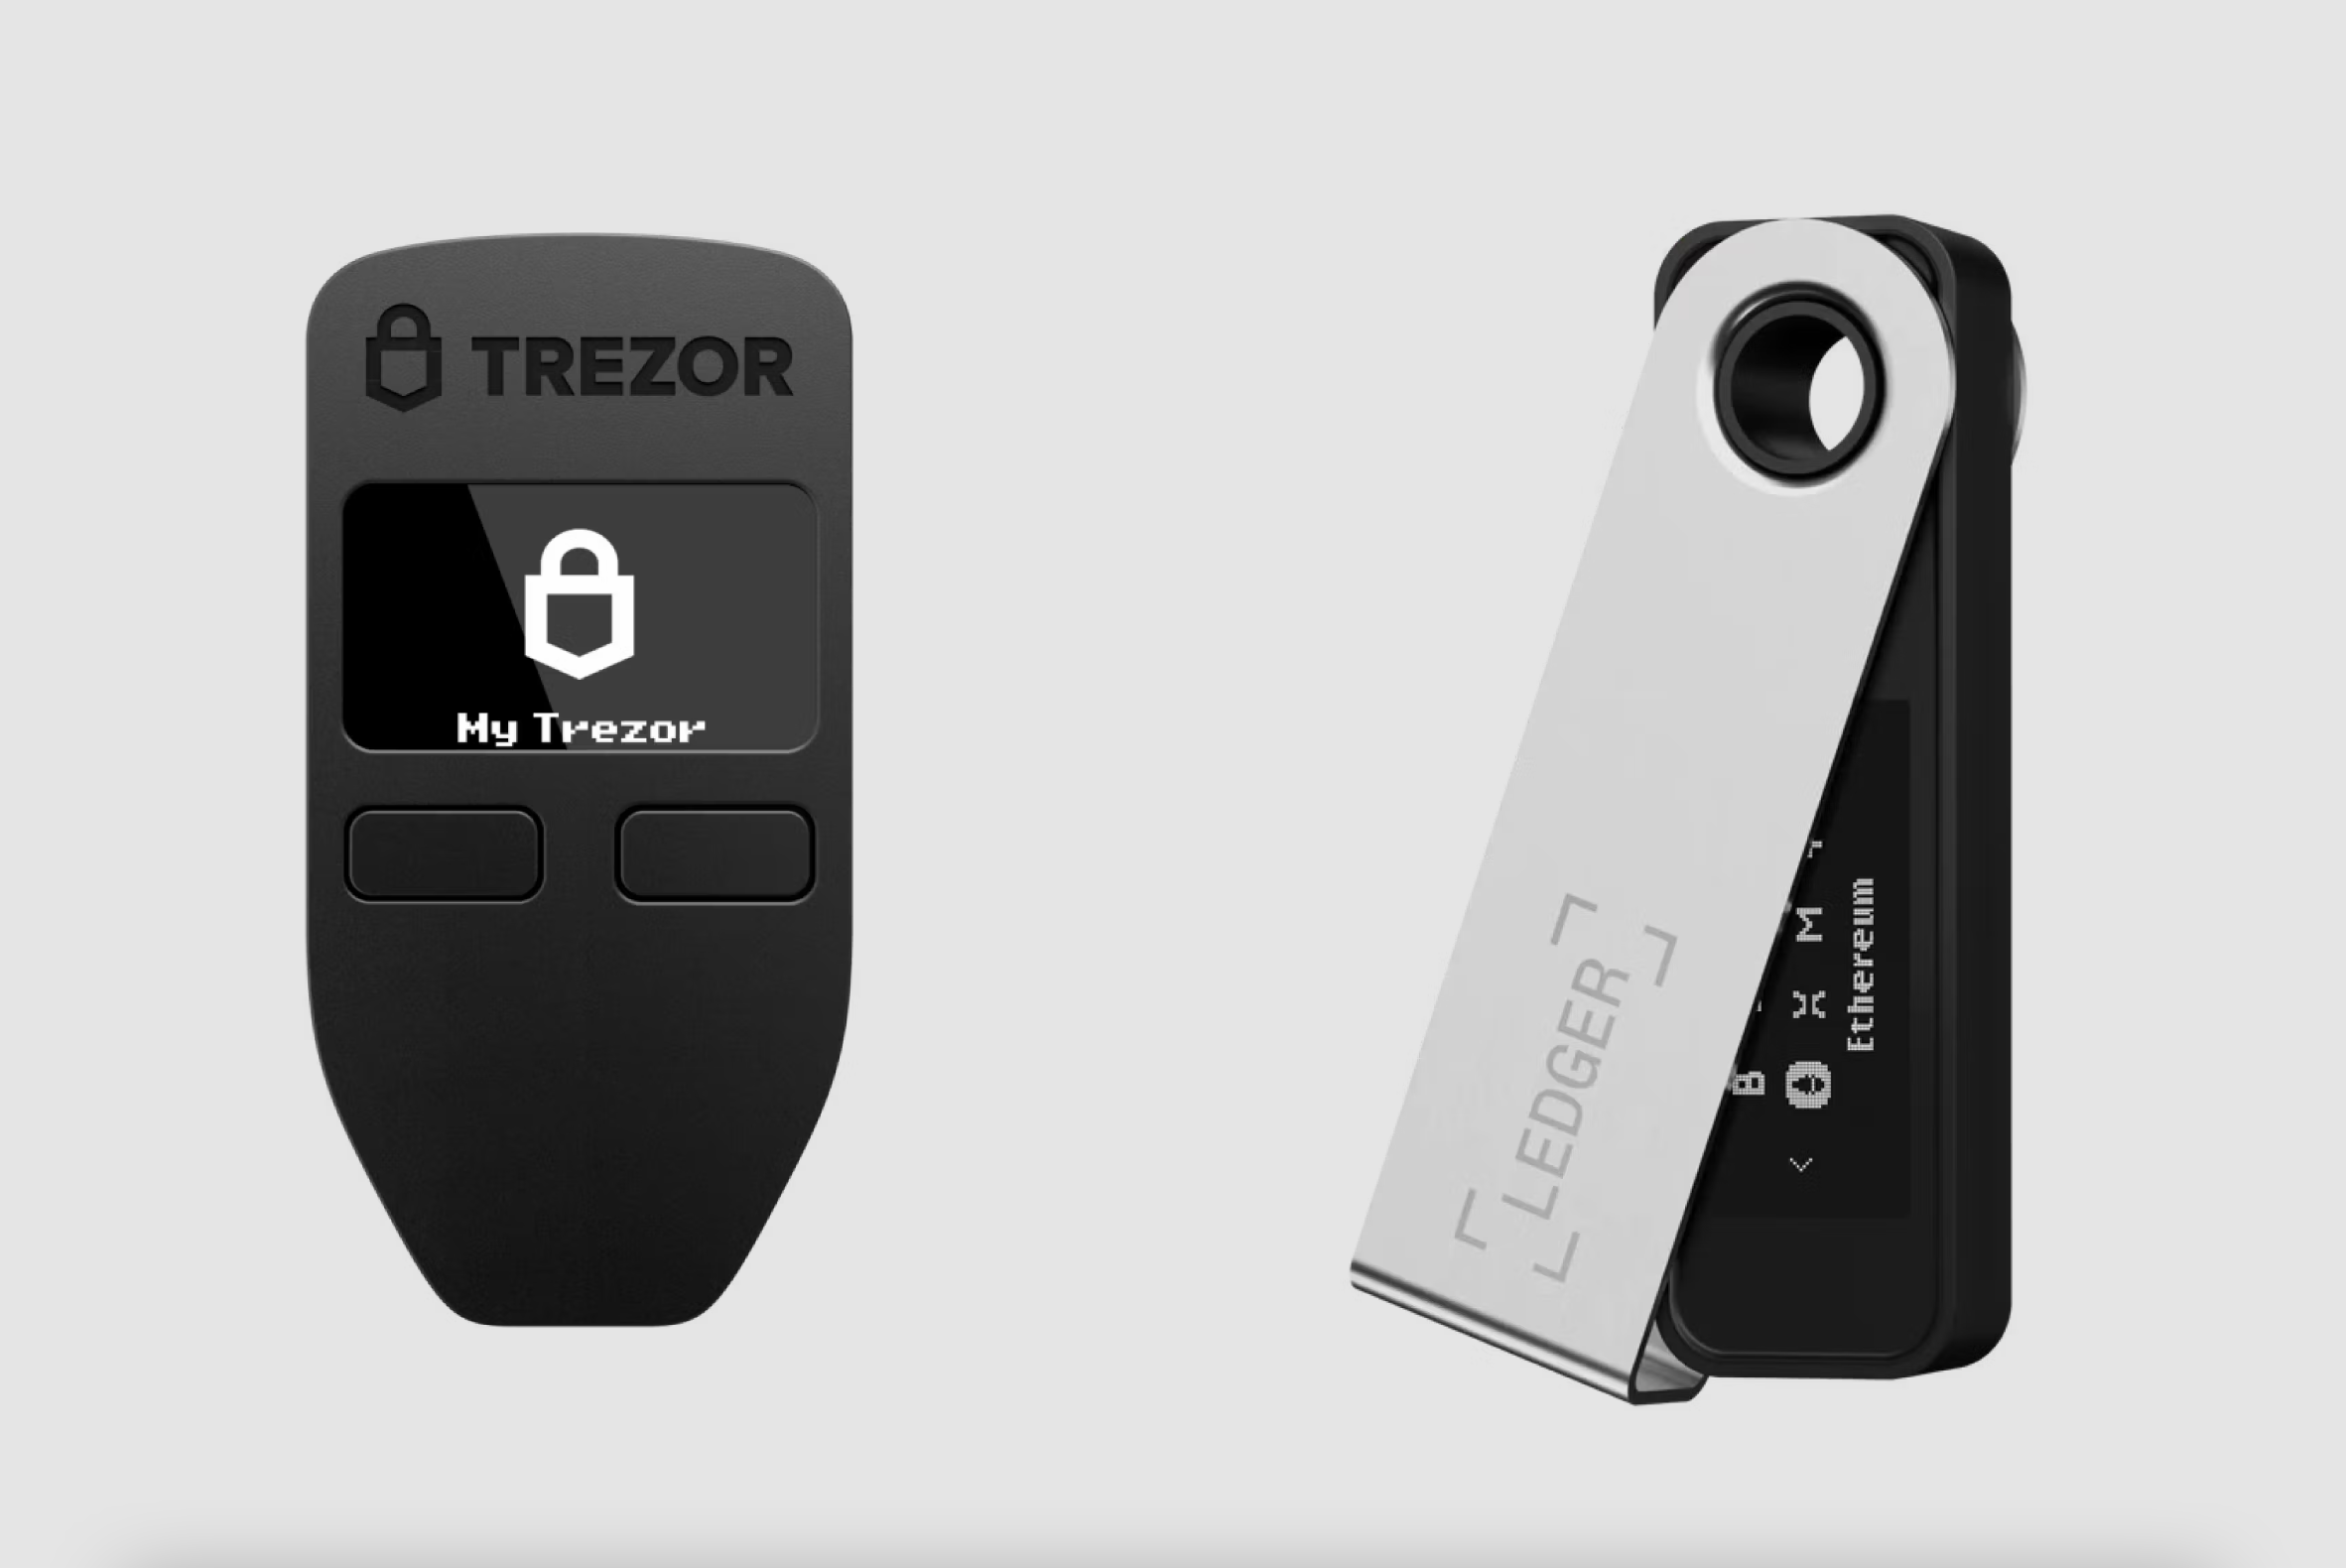 Two popular cold wallets: Trezor Model T (left) and Ledger Nano S Plus (right)